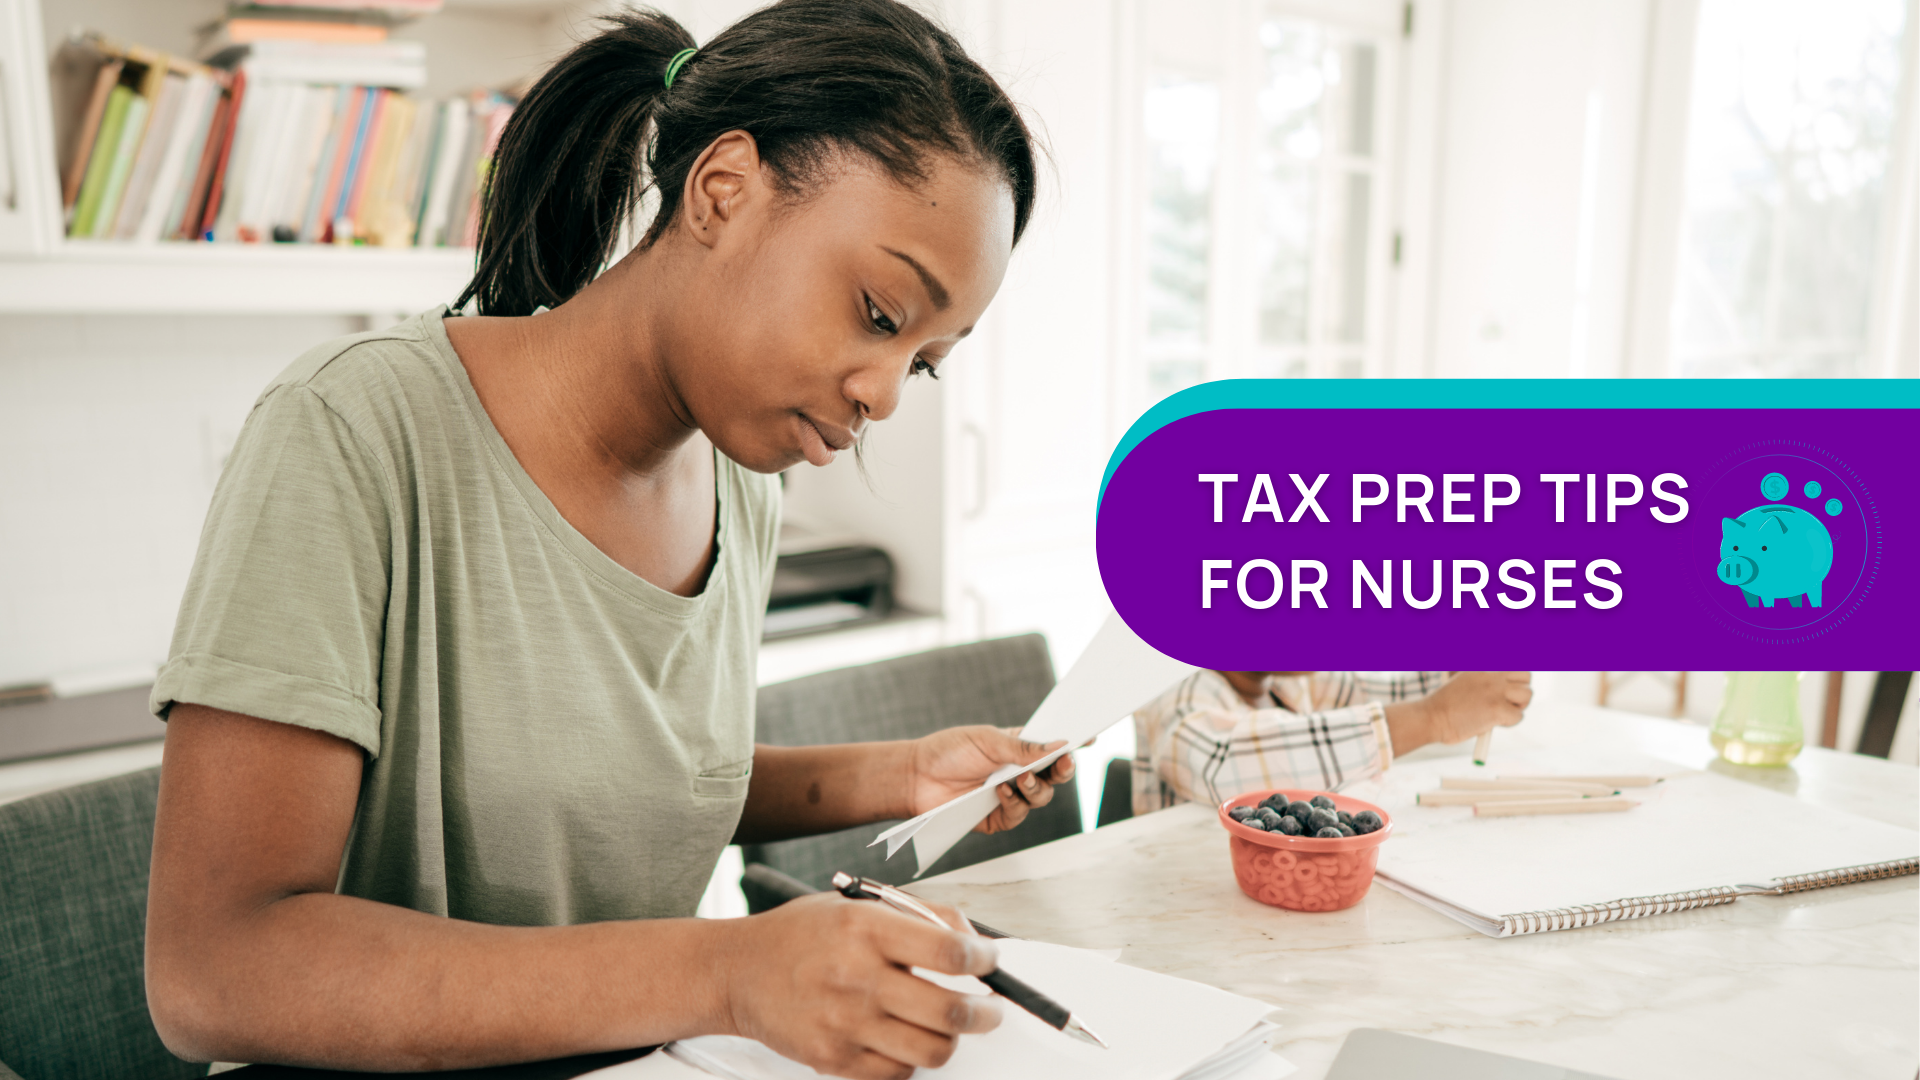 As we turn the calendar to the new year, the excitement of the holidays quickly moves to the stress and anxiety of tax filing season. 